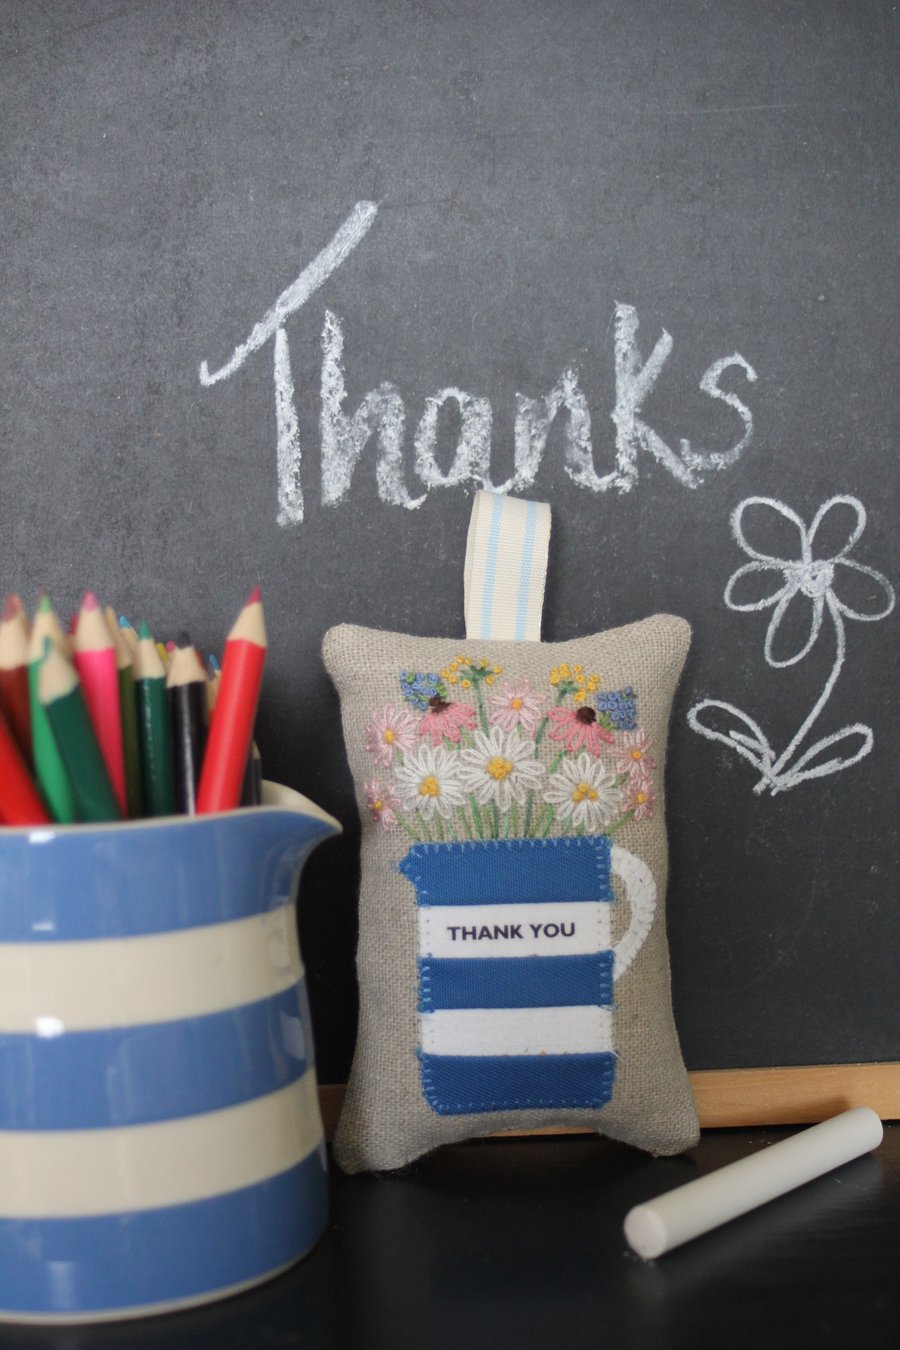 Blue stripy 'Thank You' hand-embroidered lavender bag